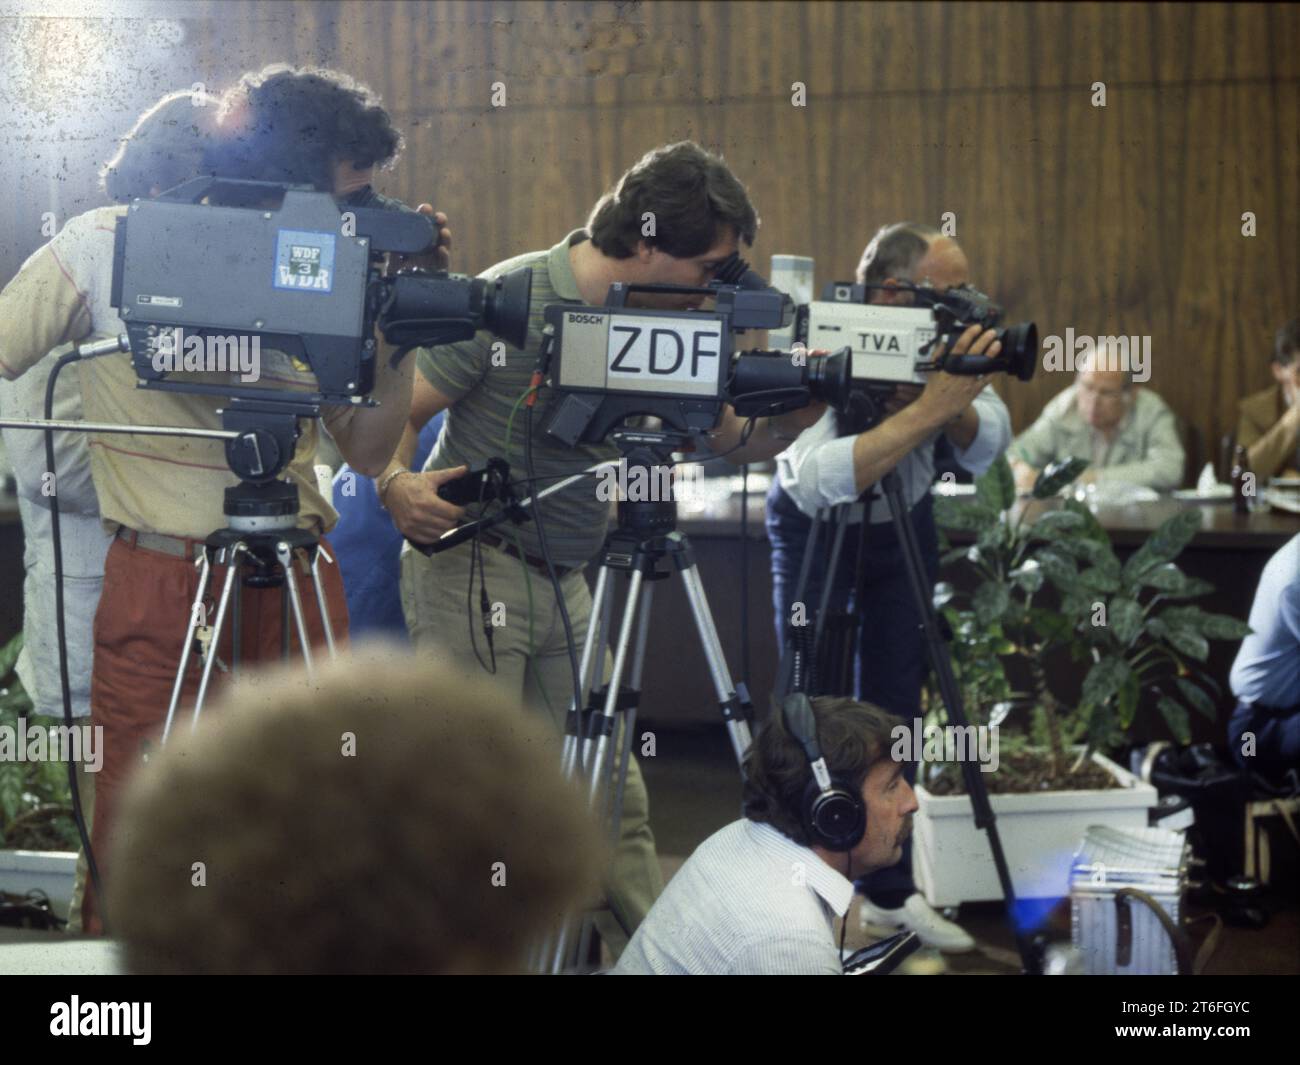 DEU, Germany: The historical slides from the 80-90s, Dortmund. TV media ca. 1984-5.WDR. ZDF Stock Photo